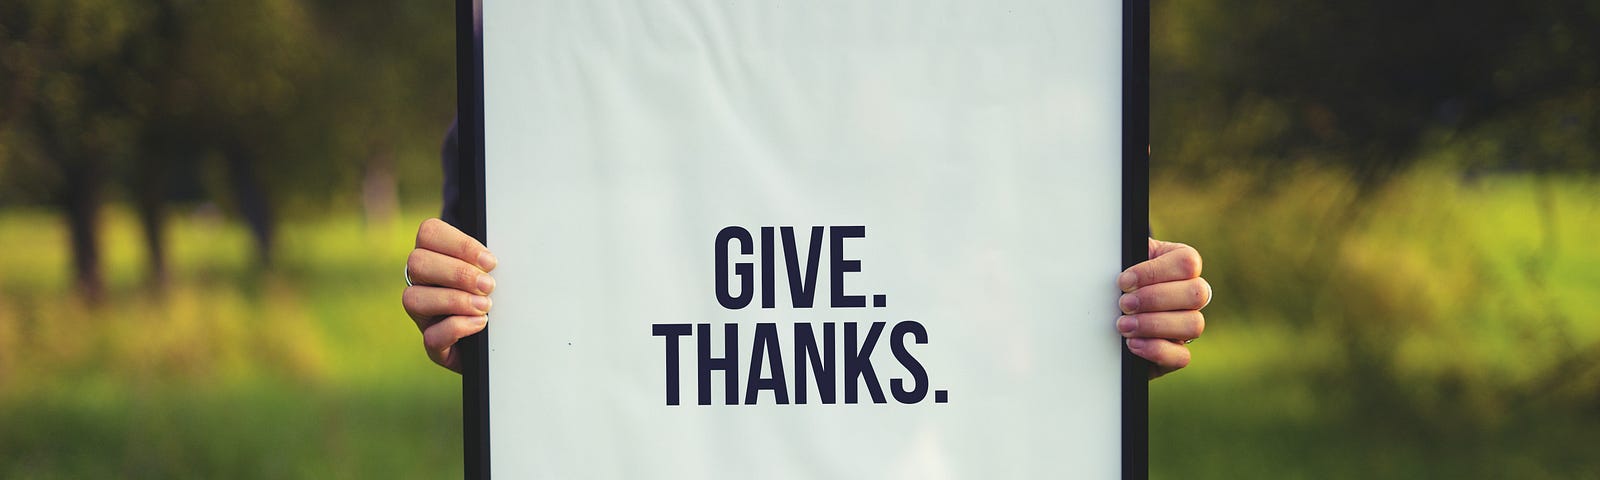 pic says “Give thanks”